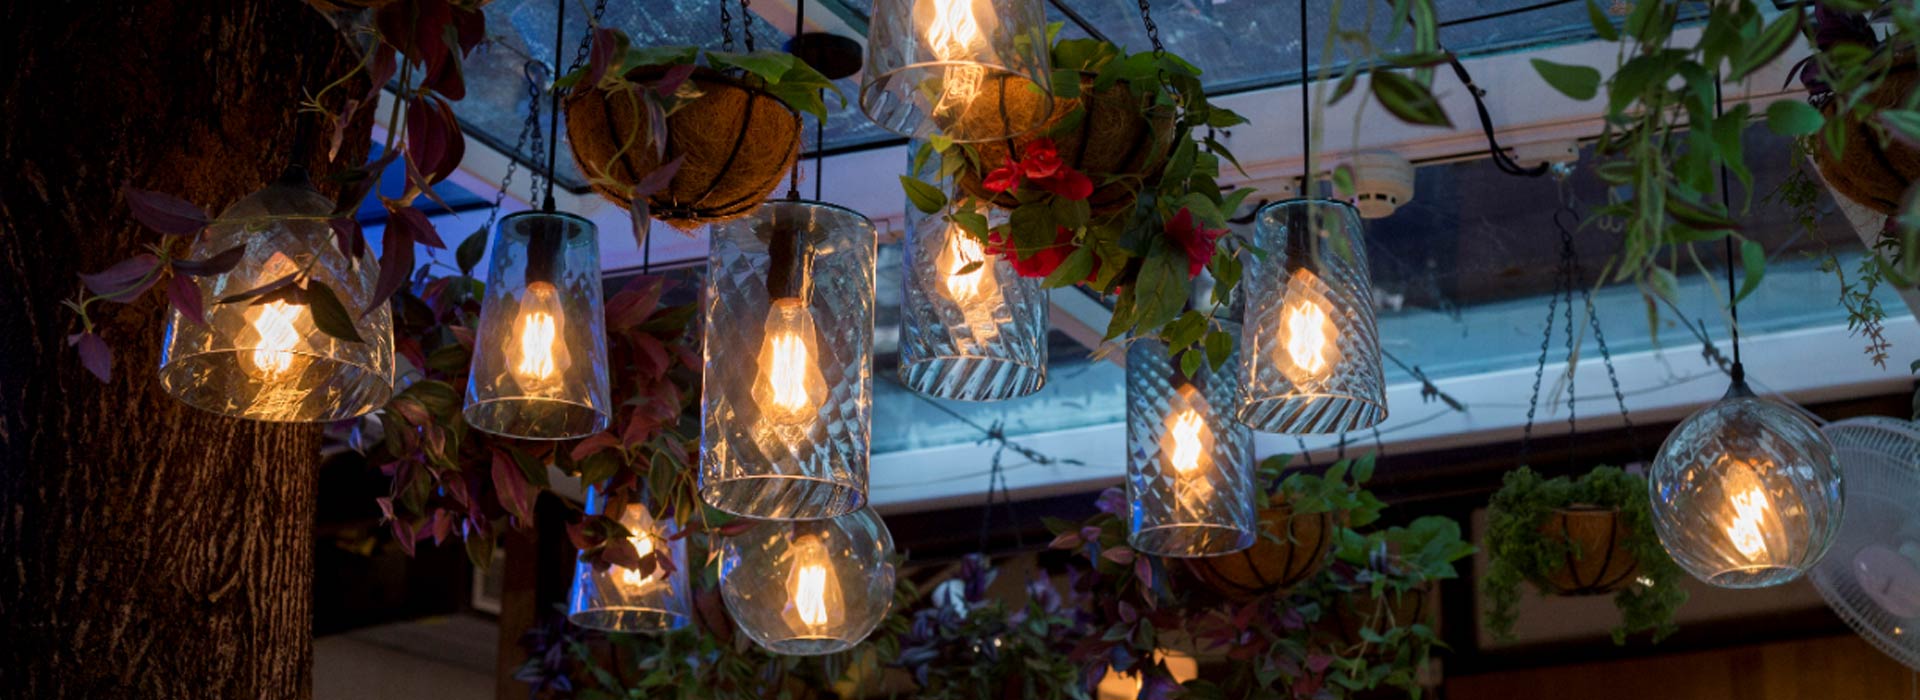 Let LED Filament Bulbs Light Up the World  IN EVERY CORNER